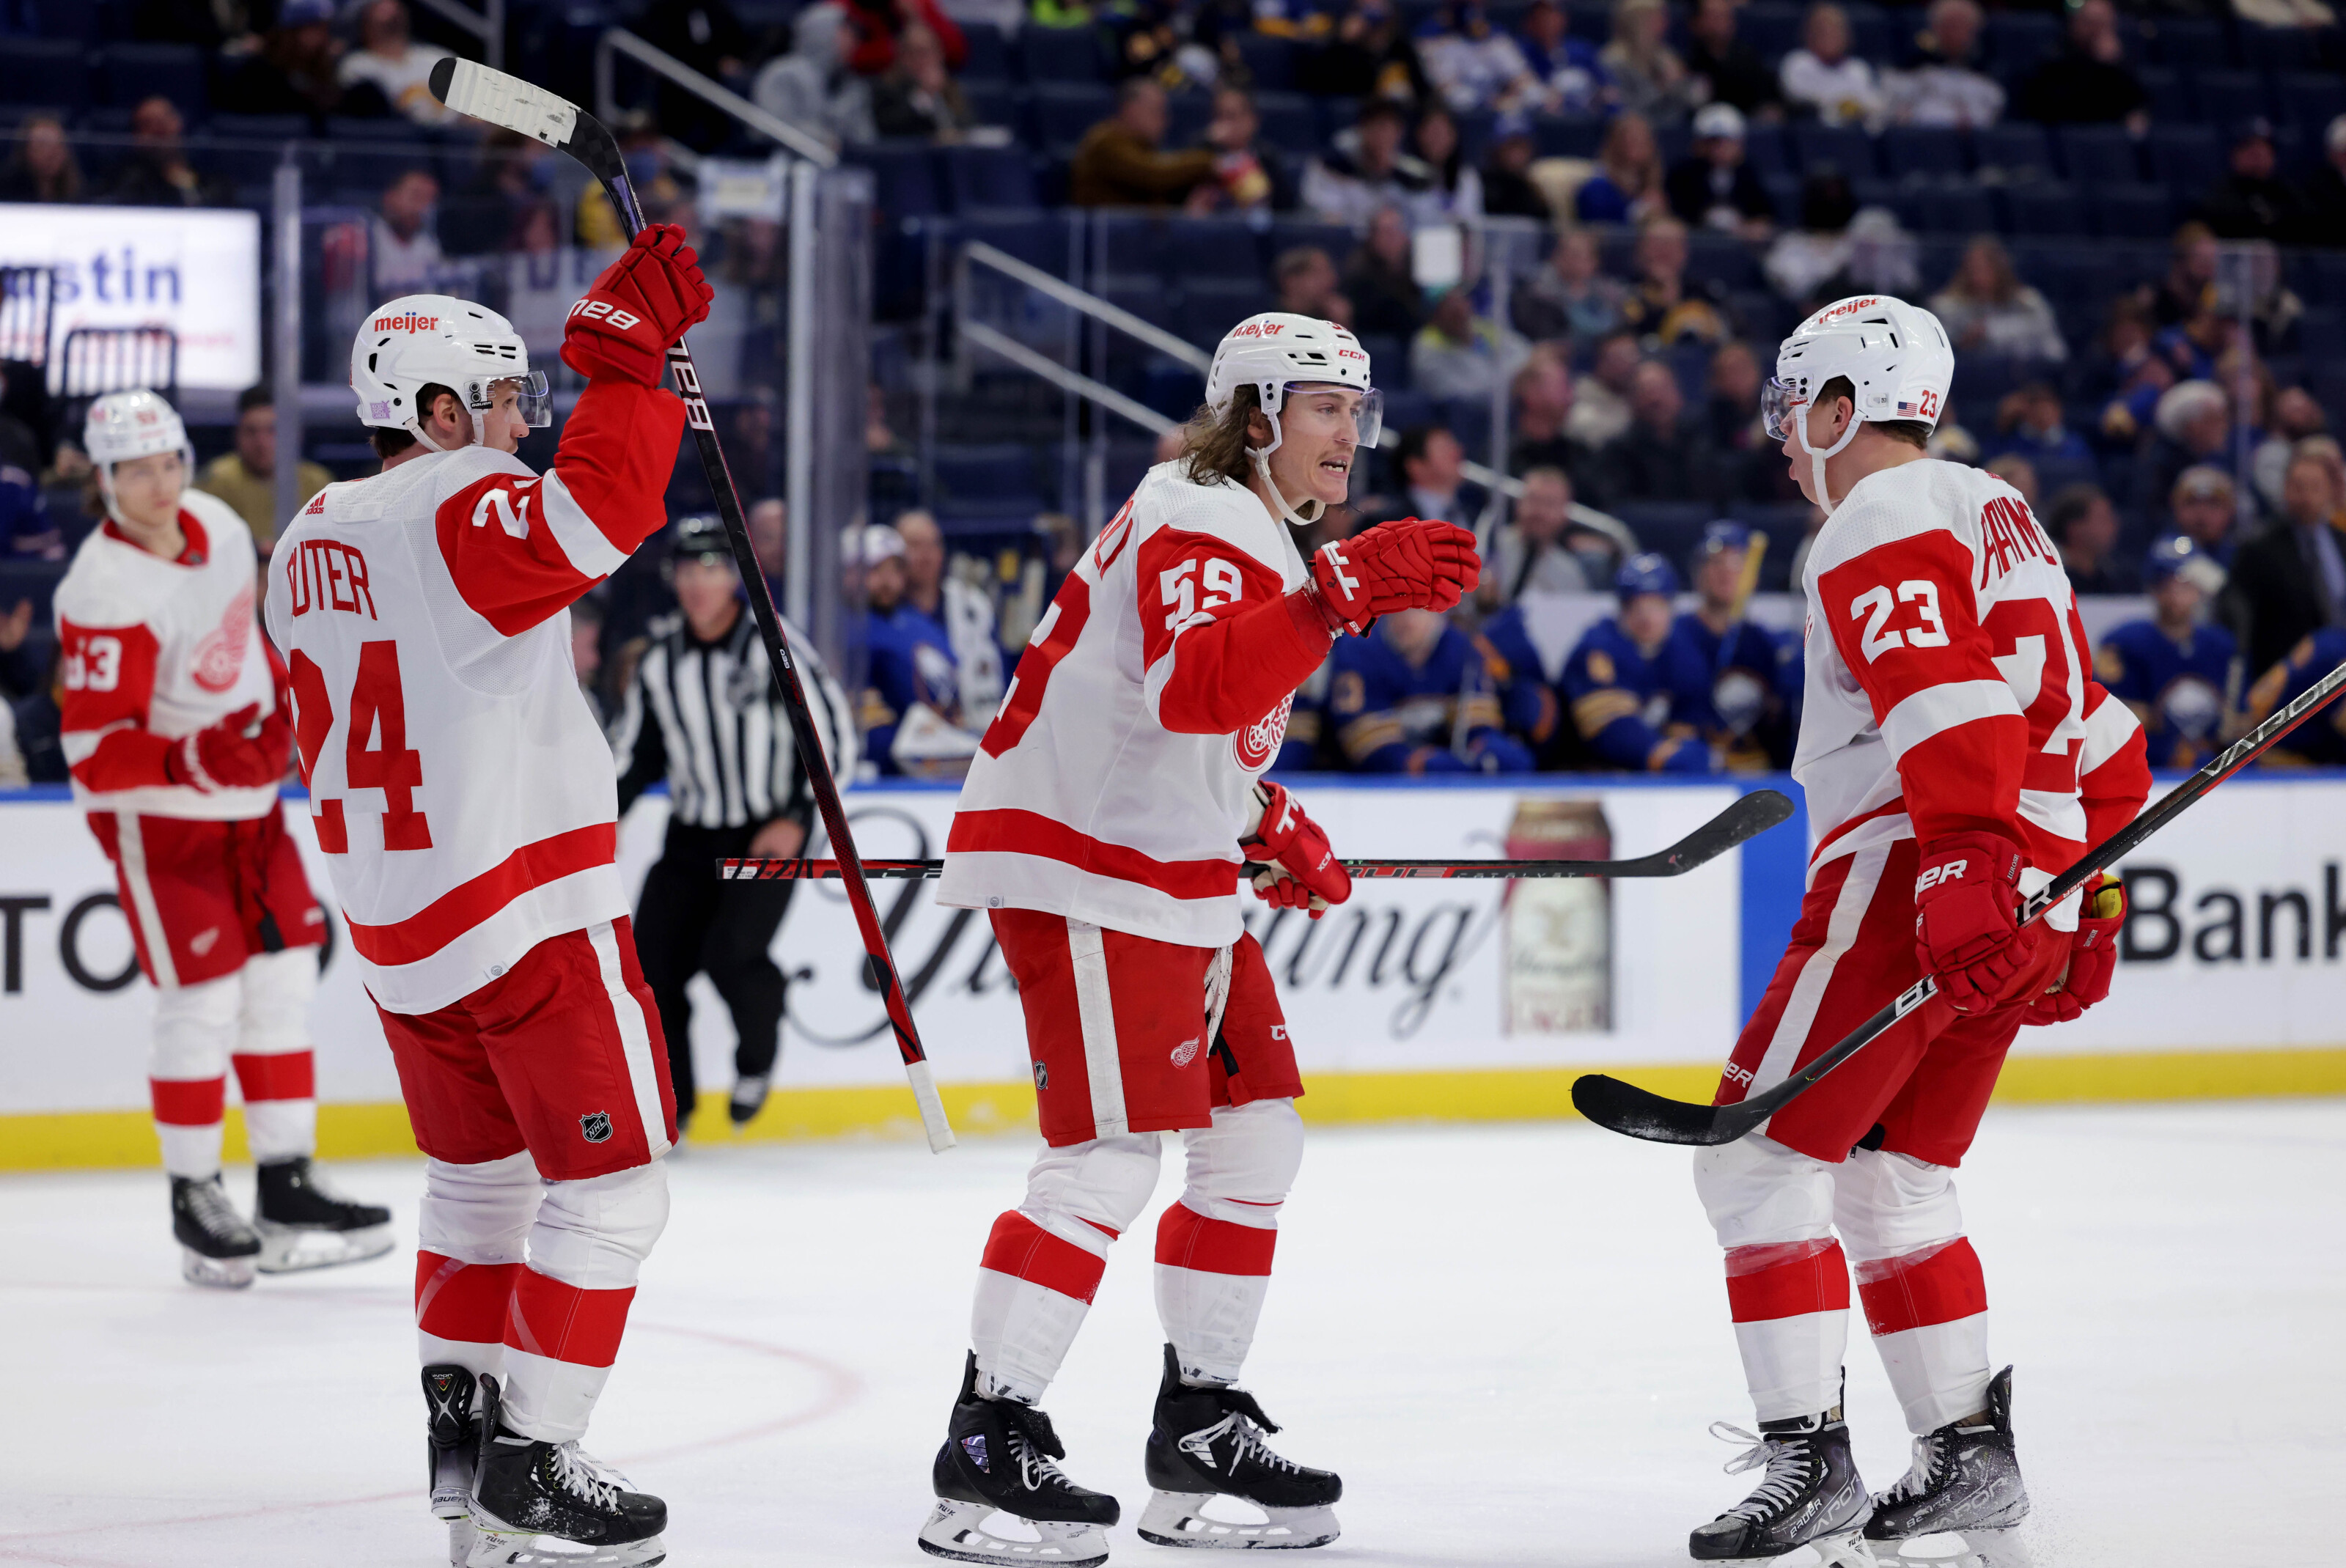 Moritz Seider Scores His First Goal as Red Wings Rally to Win 4-3